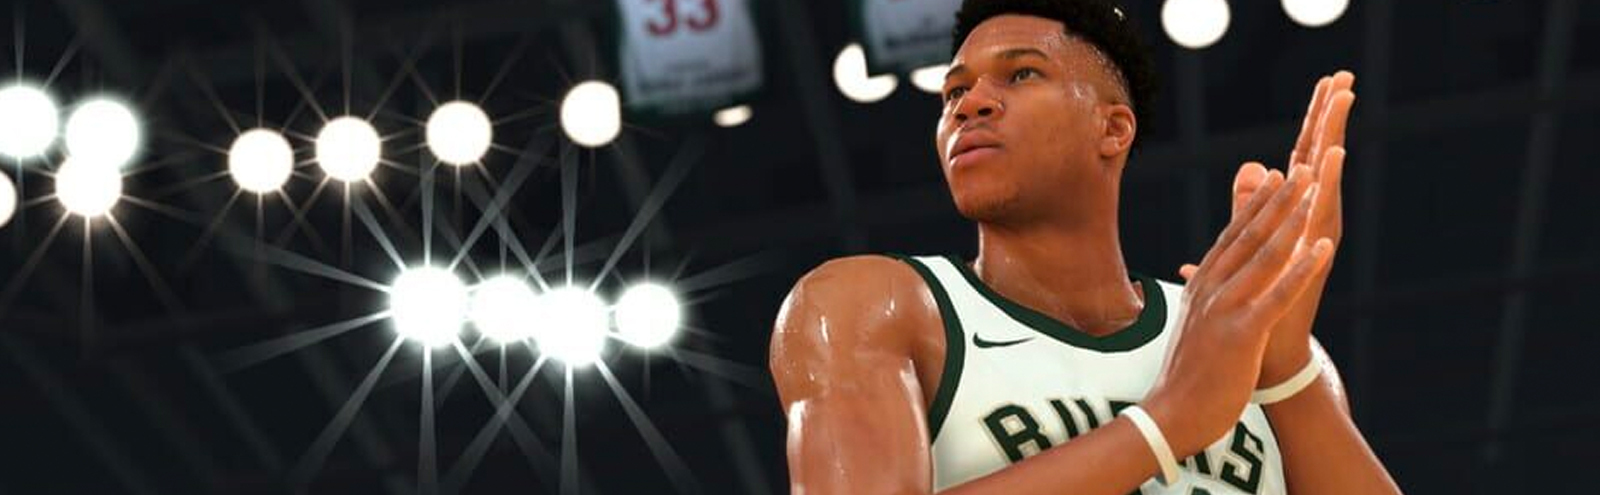 Nba 2k21 Will Apparently Feature Three Different Cover Athletes